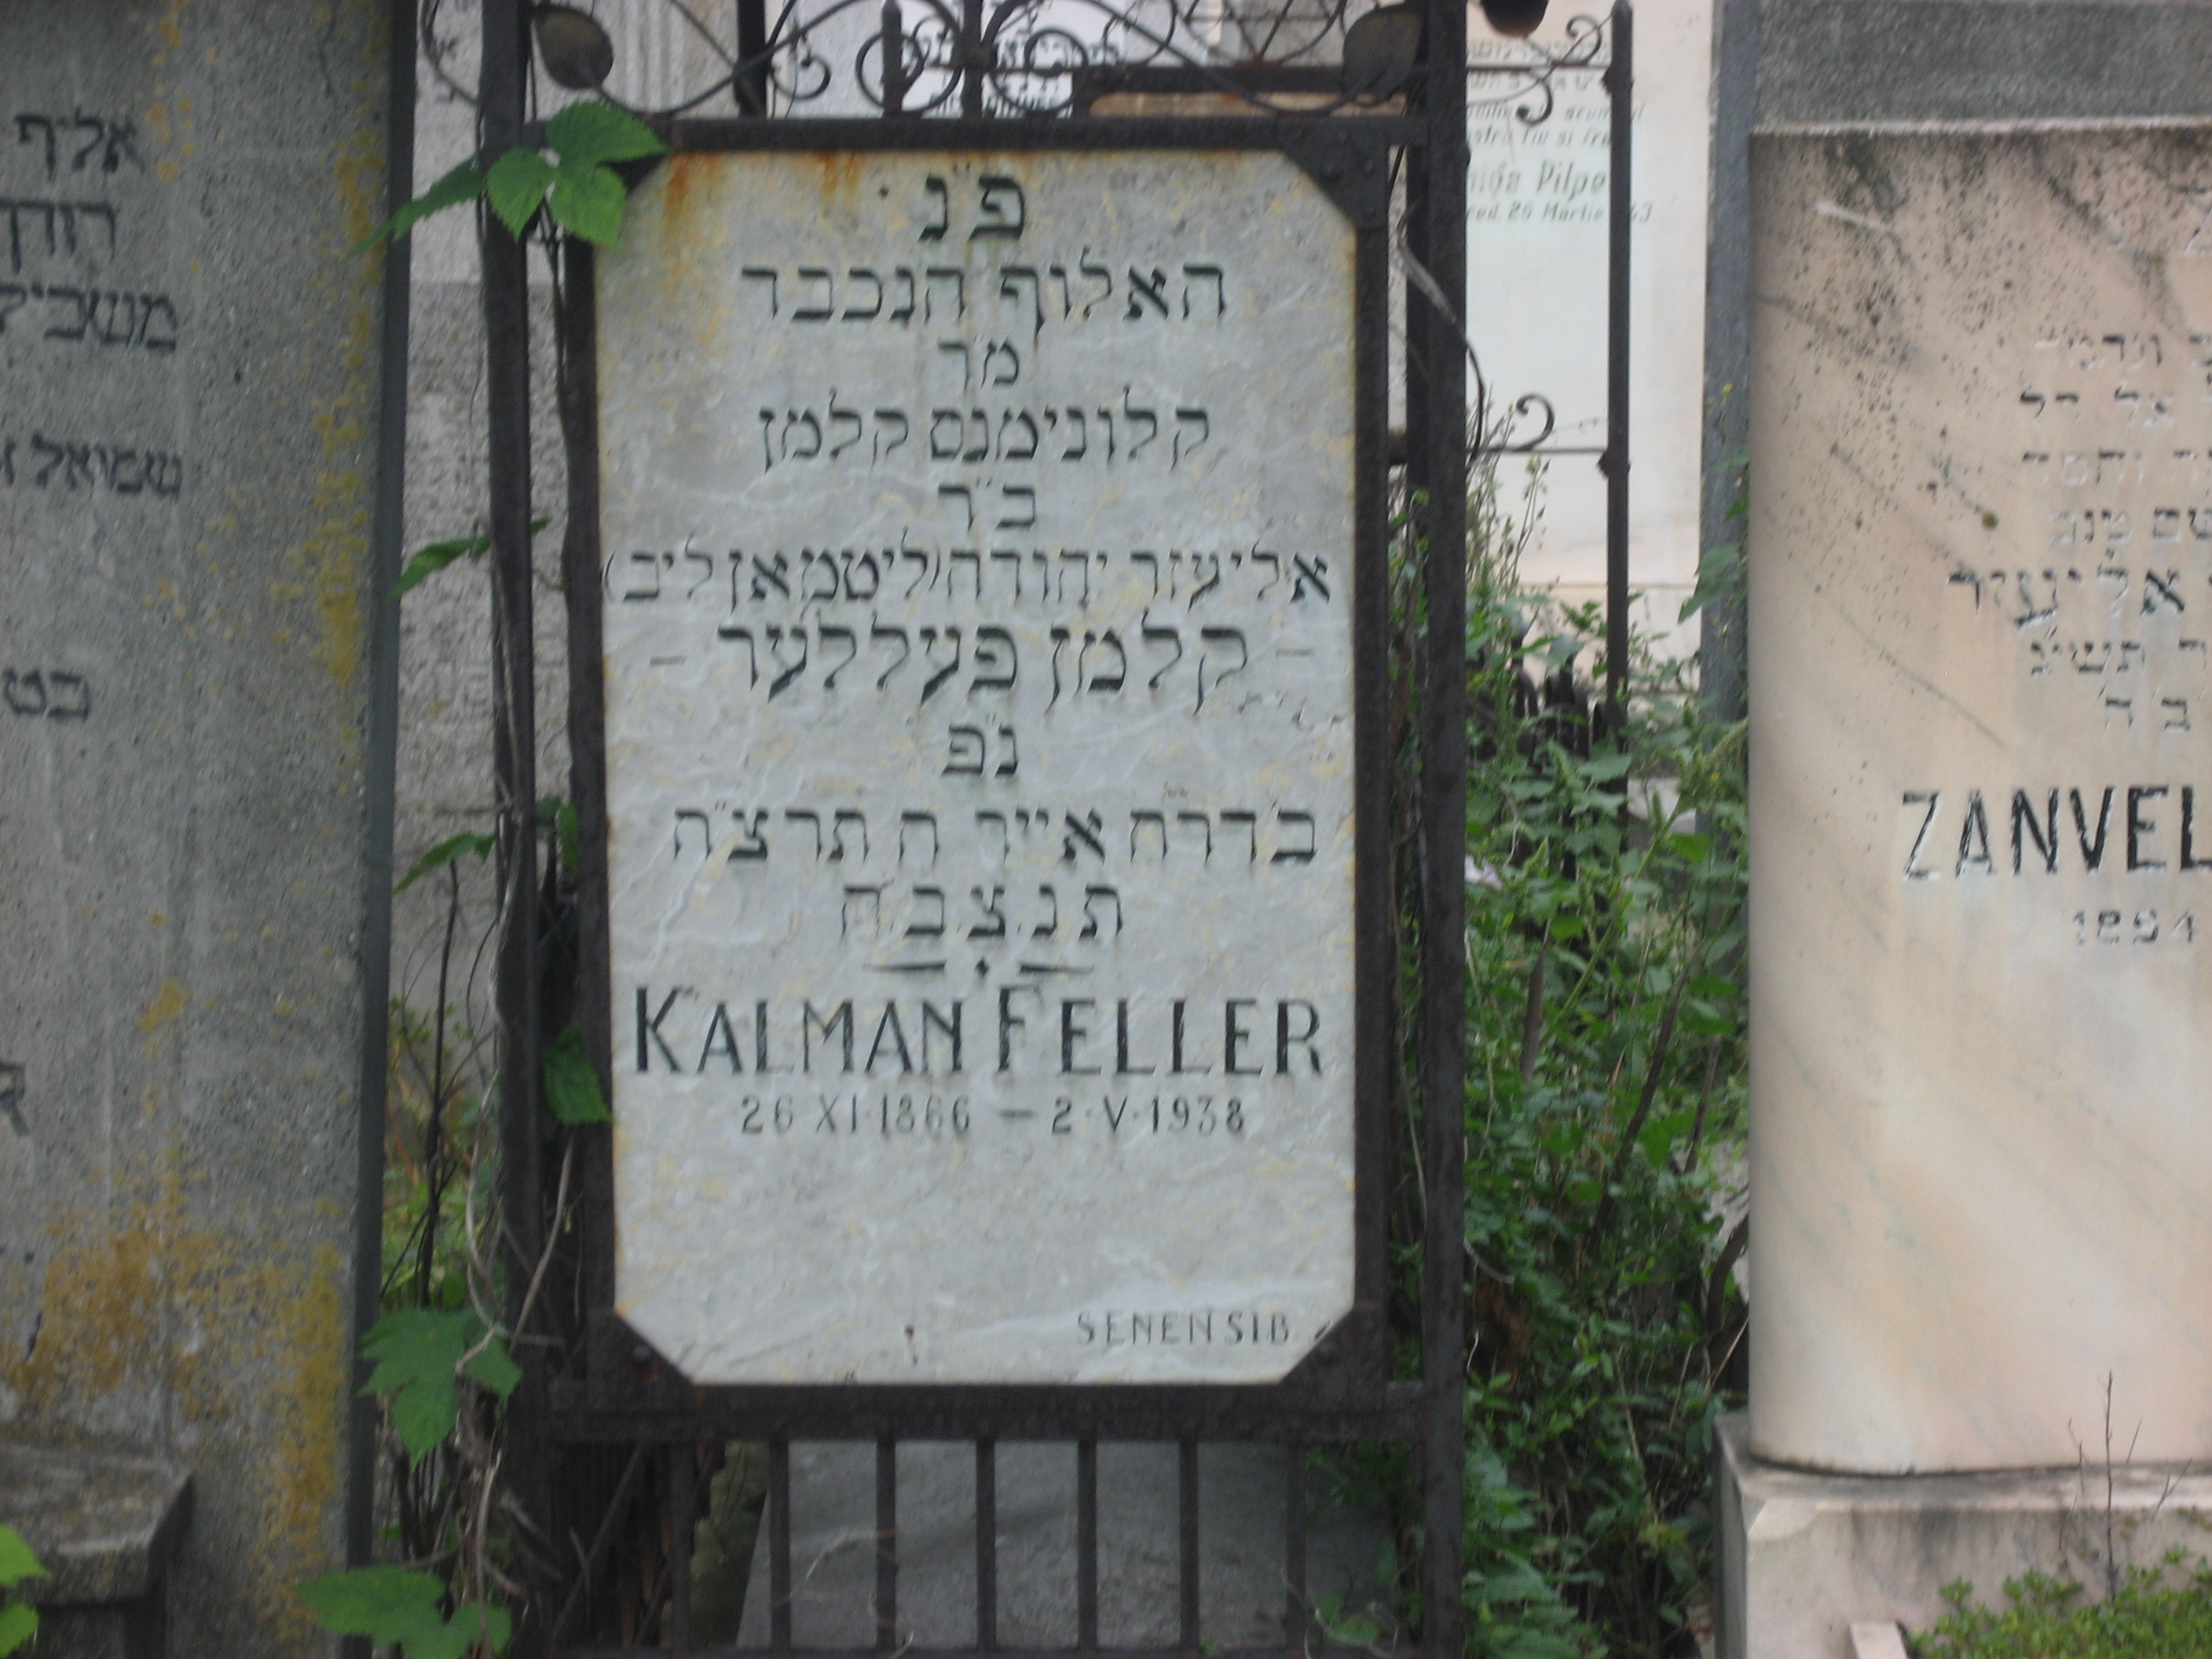 Taken on August 27th, 2007 at the Jewish (old or new) Cemetery at RO(Botoşani) and sourced from TEL(RegevChayim).